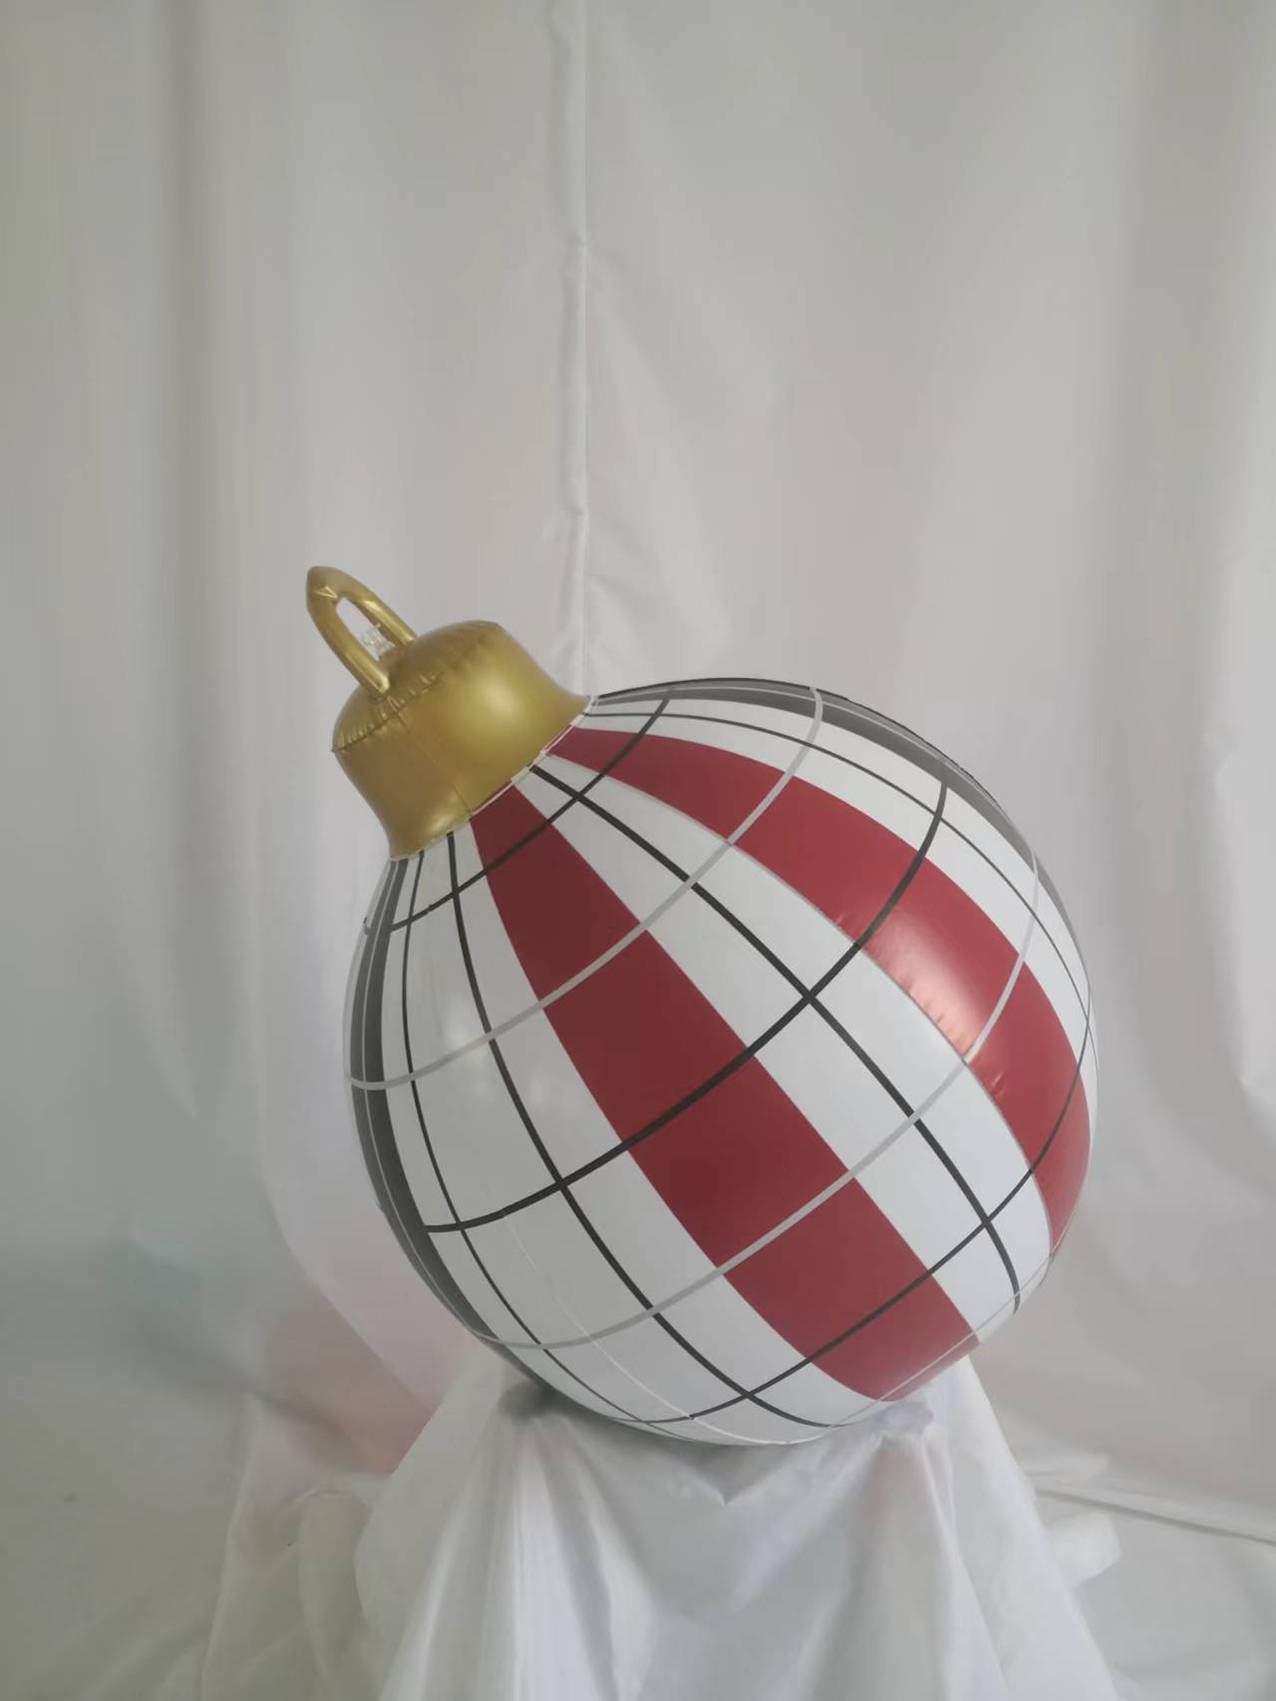 Customised Inflatable Christmas Yard Decorated Decorations Ornaments Indoor Outdoor Ball